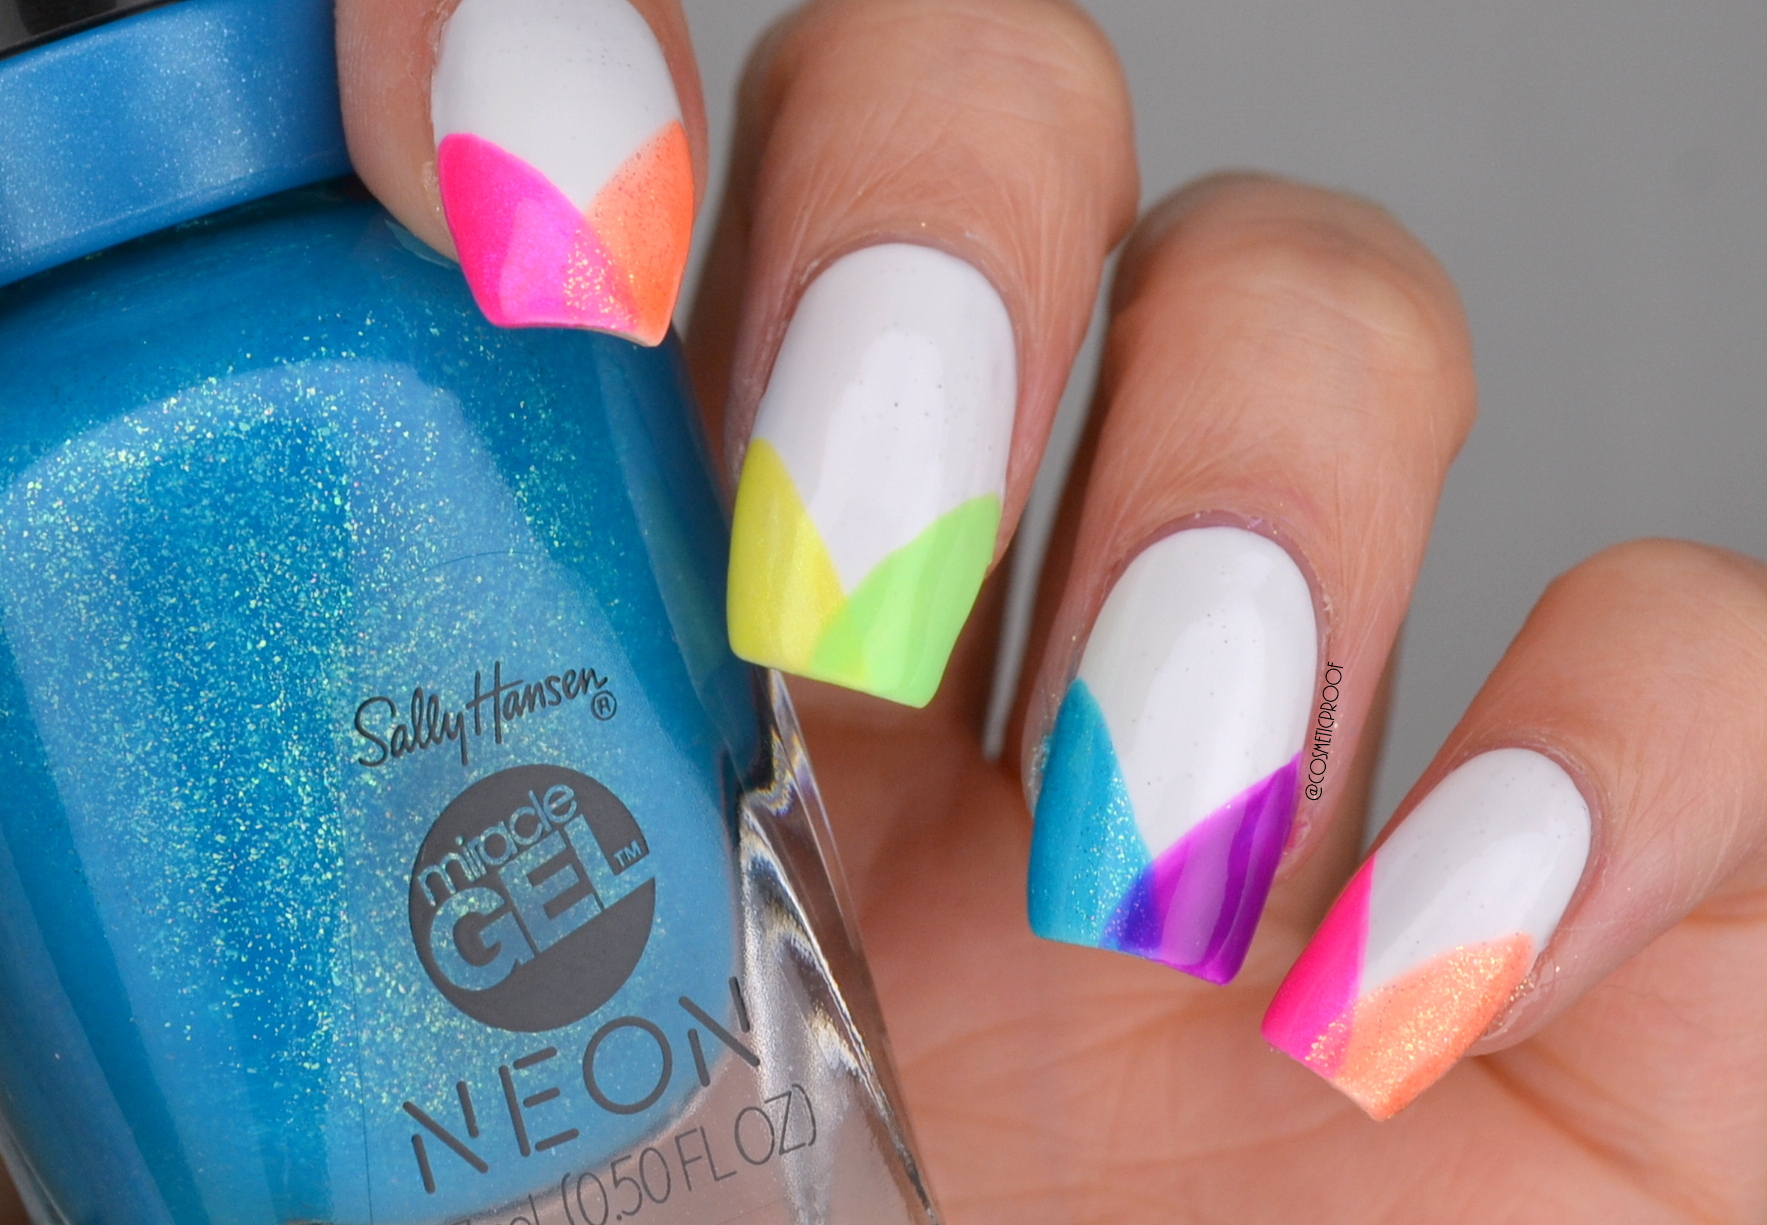 Neon Nail Art: 12 Ideas for a Bold and Bright Manicure - wide 4